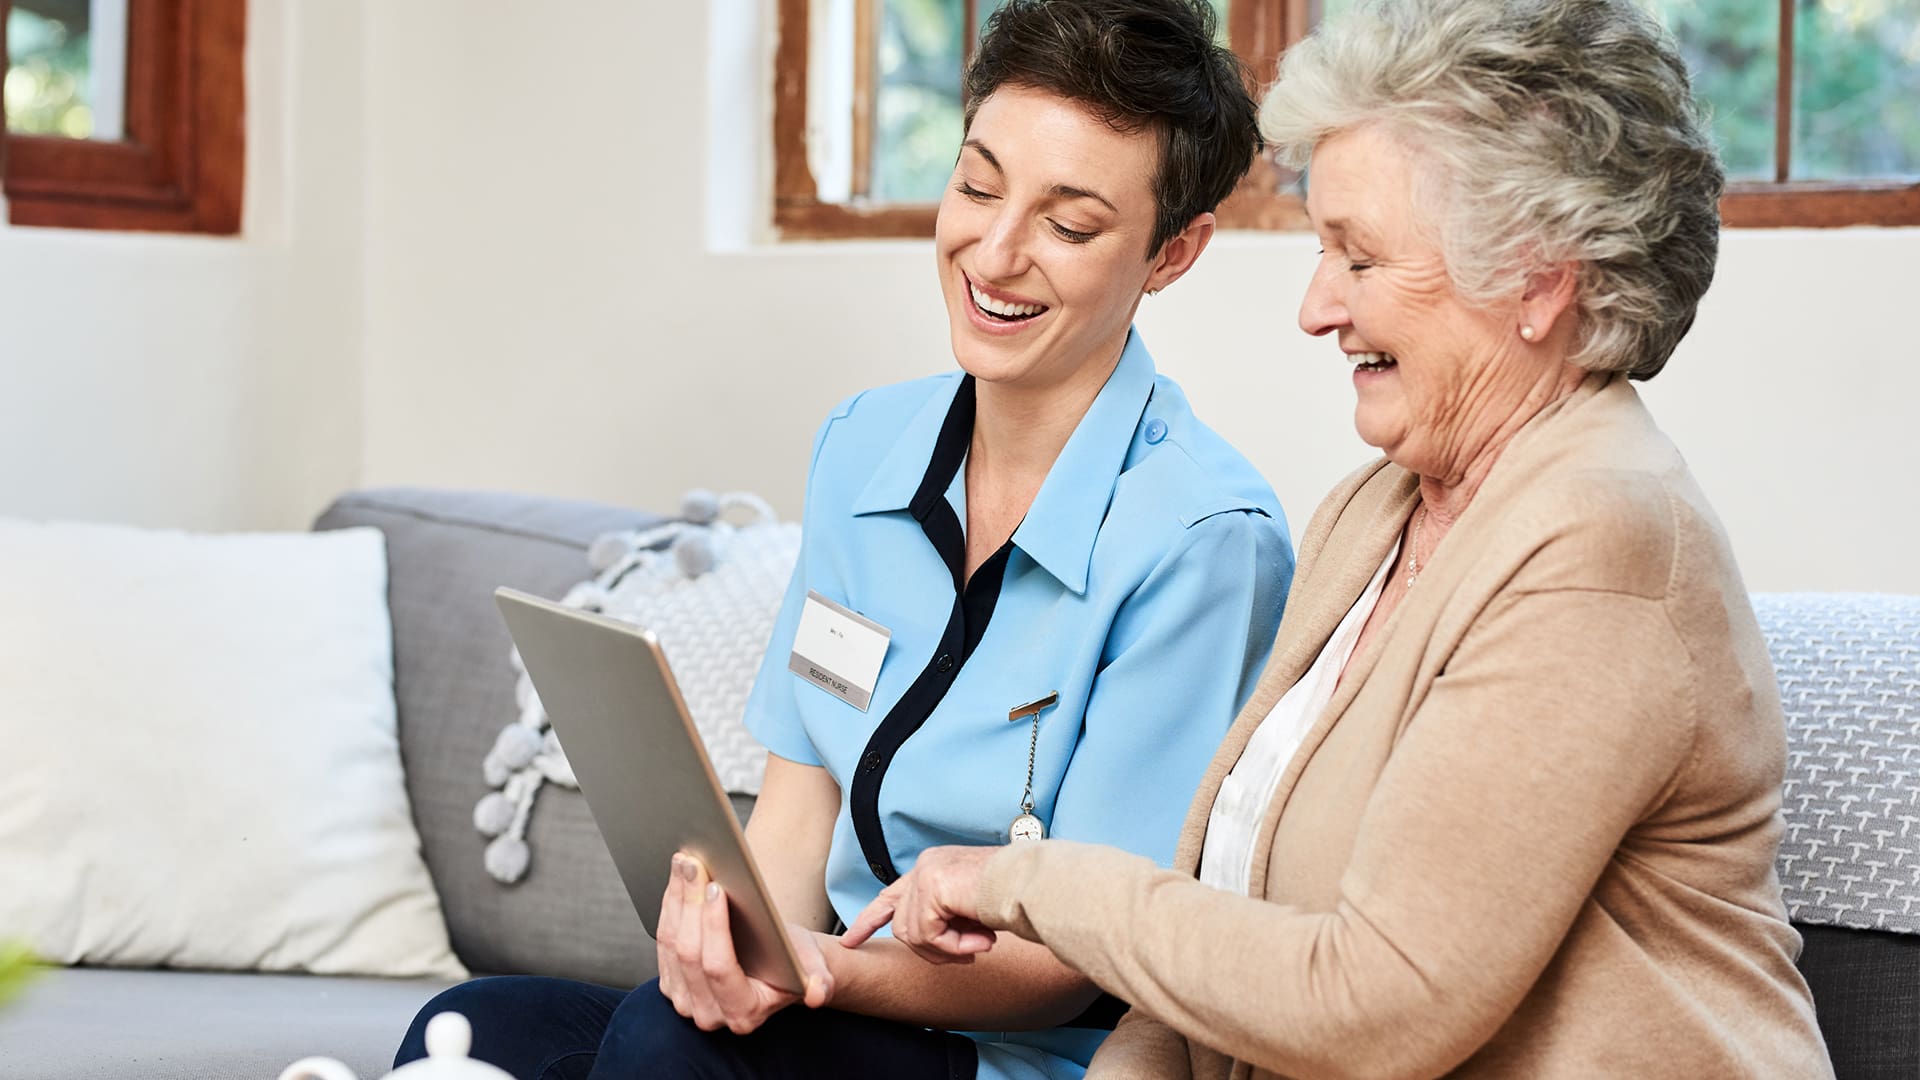 nurse caregiver helping senior woman video call with family on a tablet device